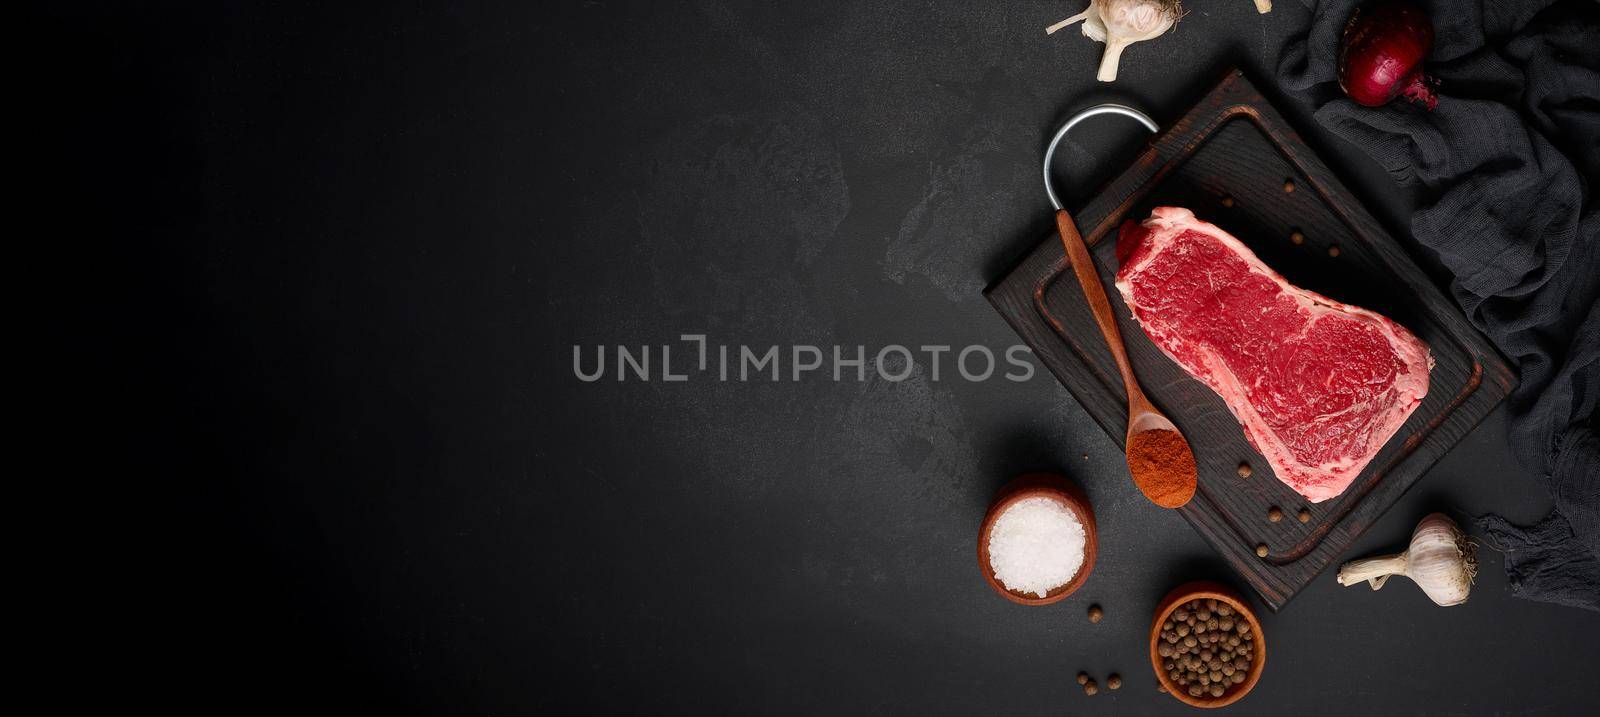 Raw juicy piece of beef meat on the bone lies on a wooden cutting board, spices for cooking on a black background. Meat tenderloin New York, copy space